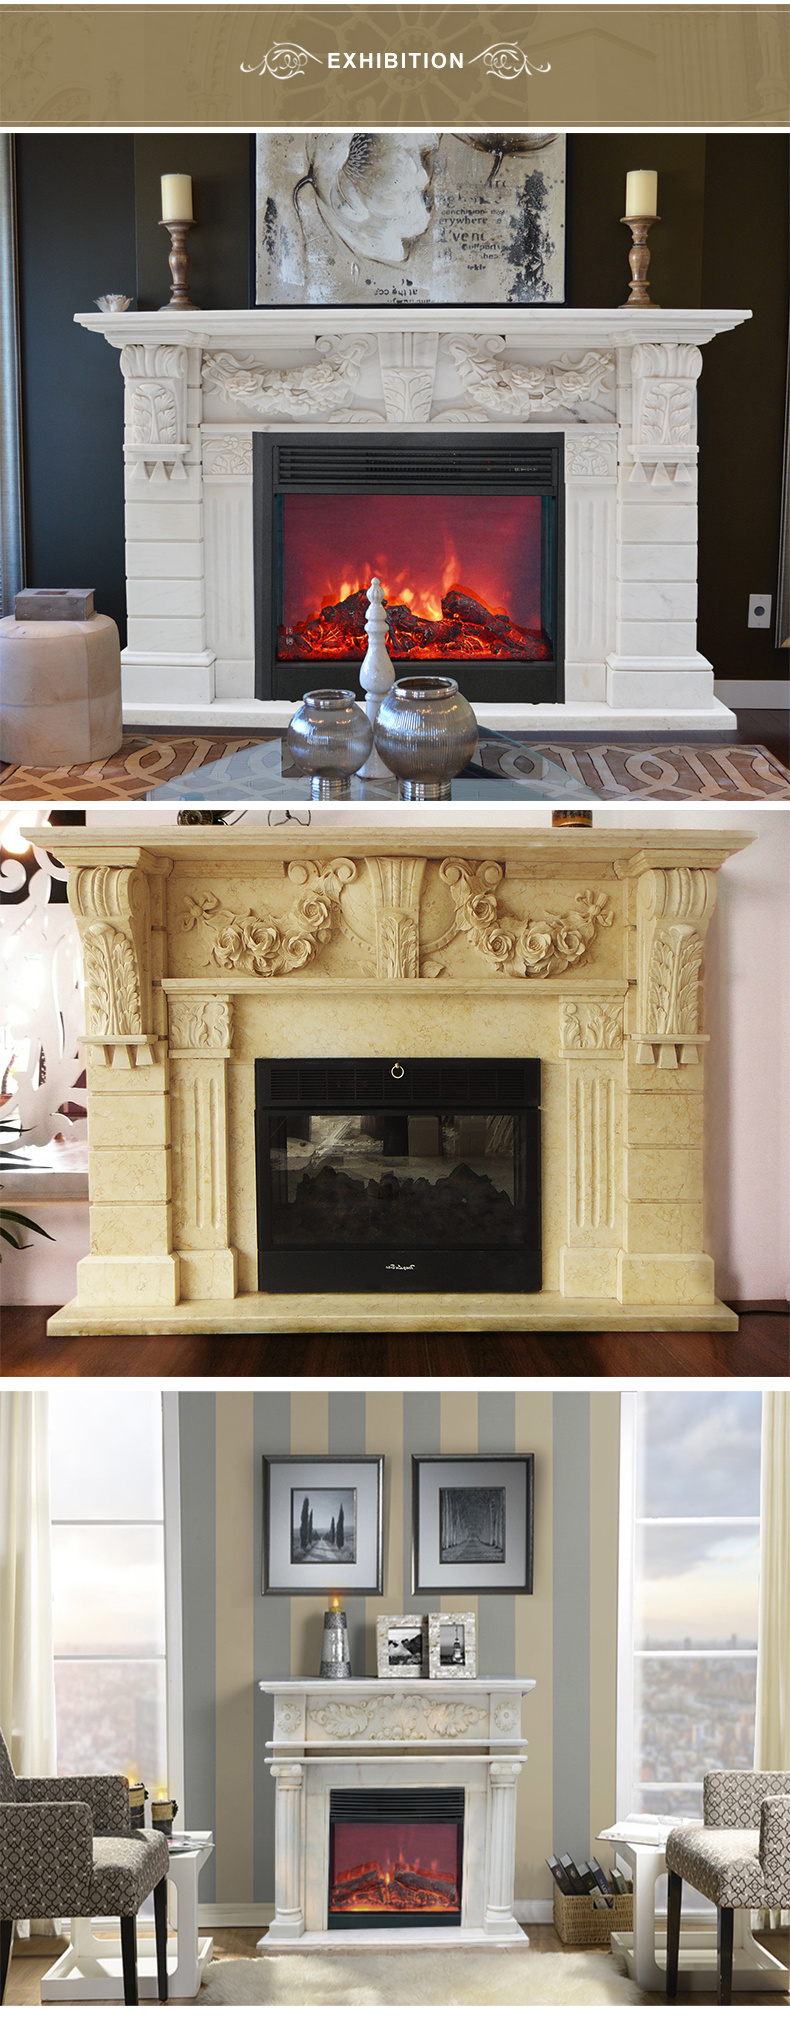 White/Beige Stone Fireplace, Electric Fireplace and Marble Fireplace Mantel